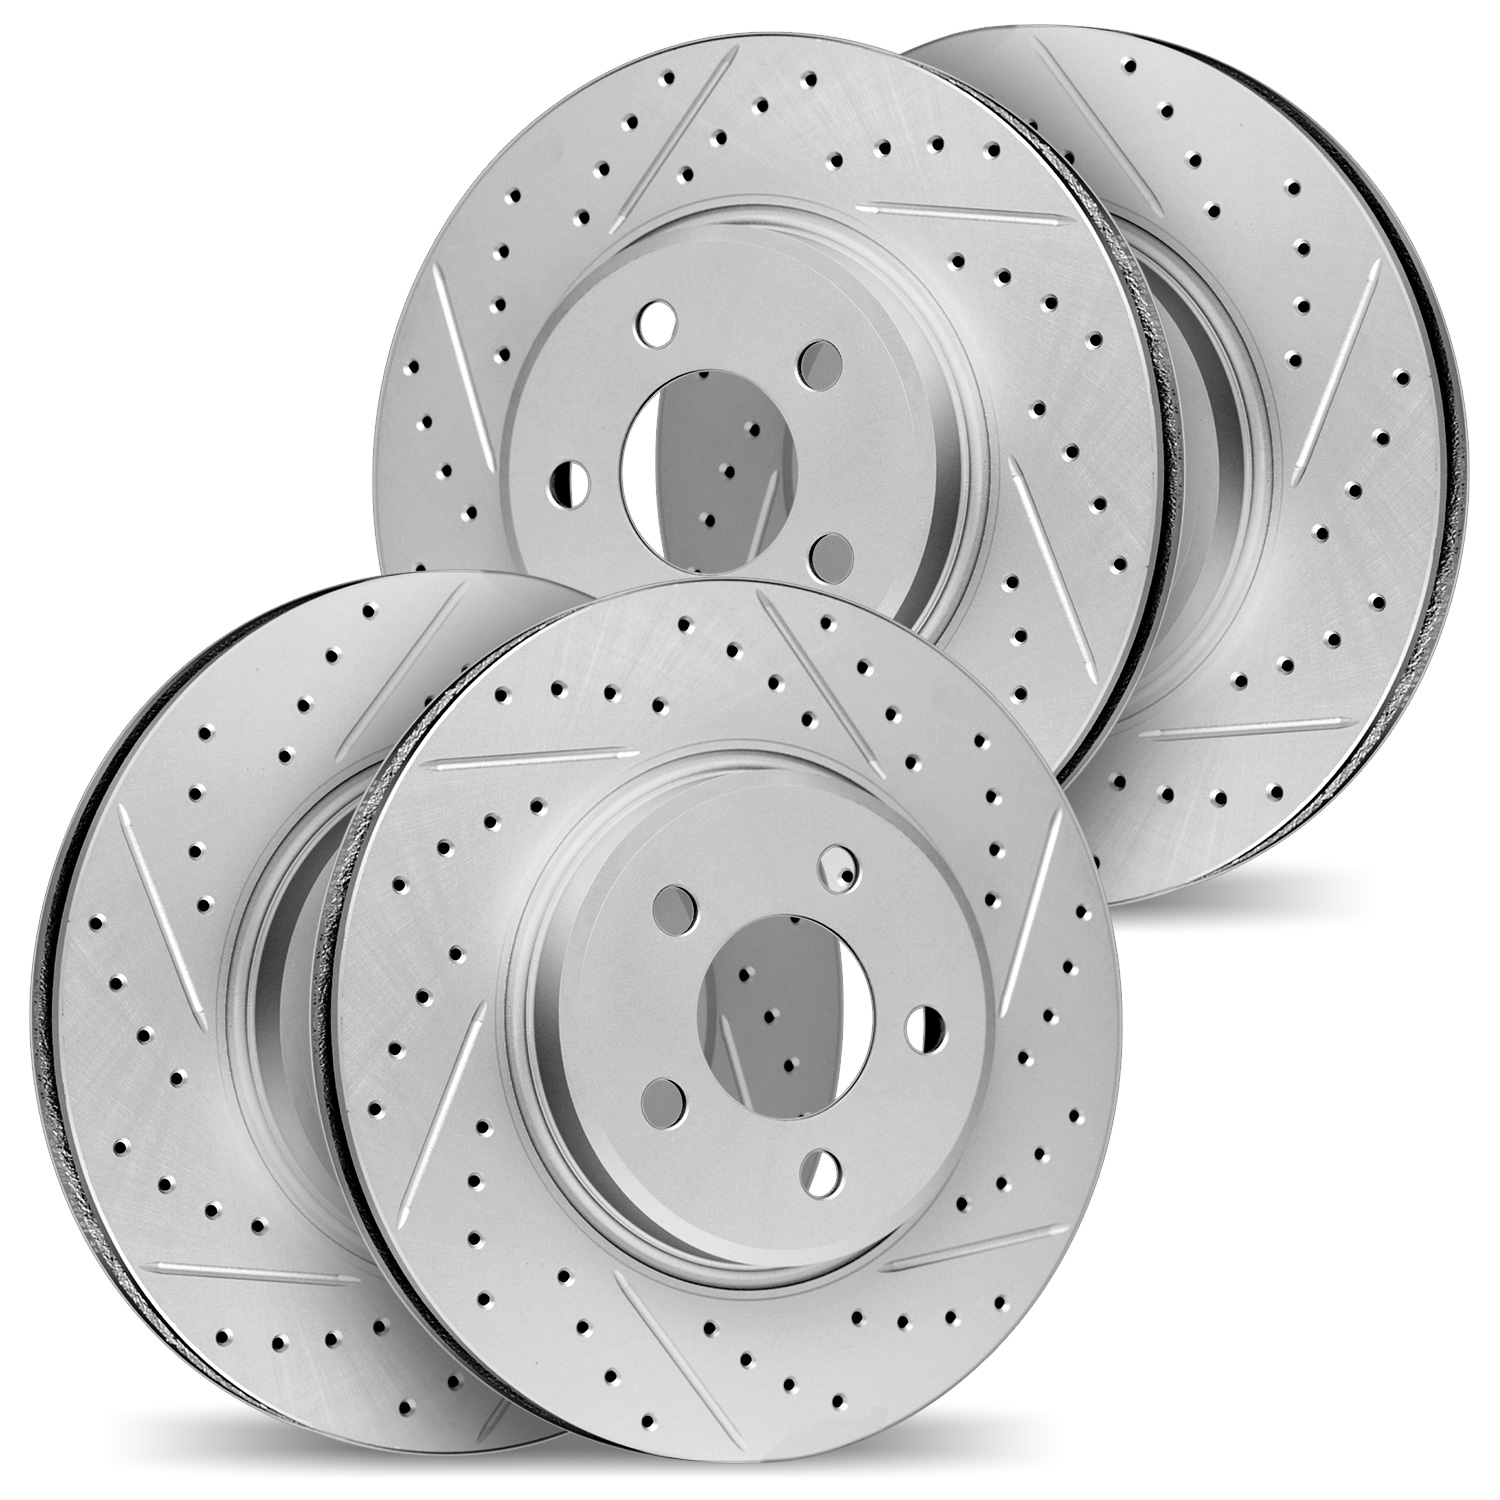 2004-55003 Geoperformance Drilled/Slotted Brake Rotors, 2003-2011 Ford/Lincoln/Mercury/Mazda, Position: Front and Rear